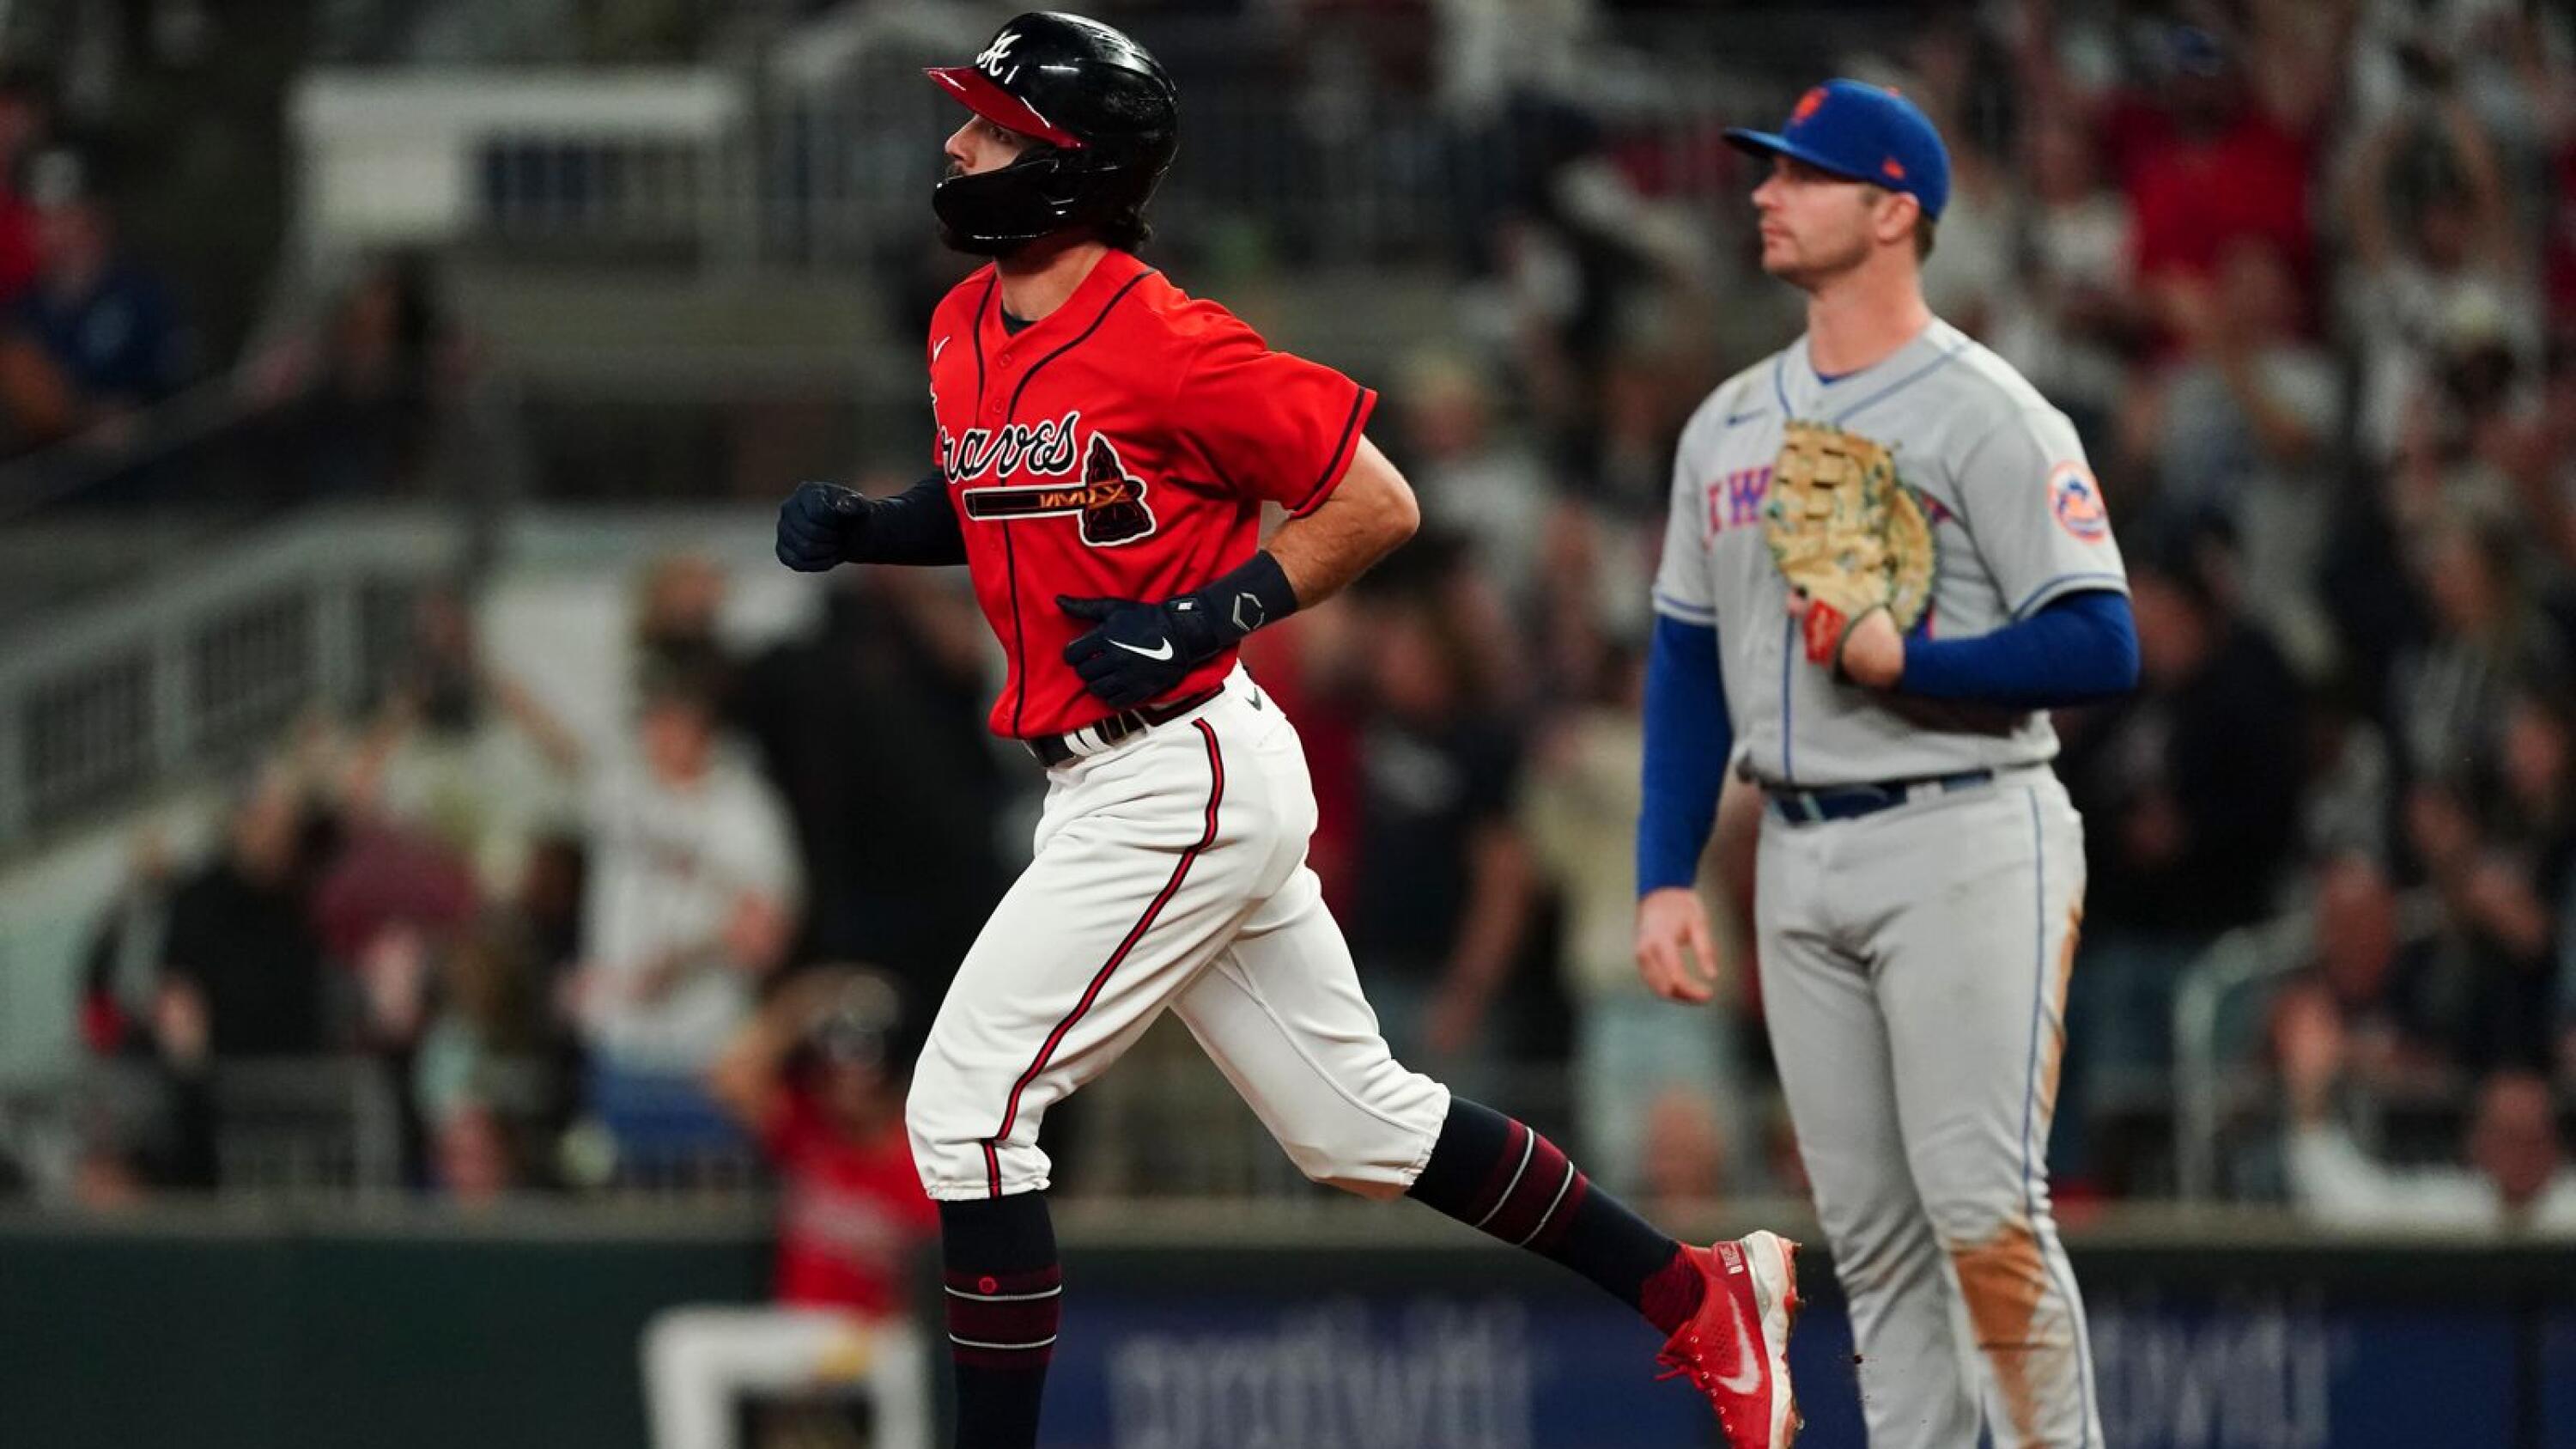 Braves hit 3 HRs off deGrom and tie Mets of NL East lead